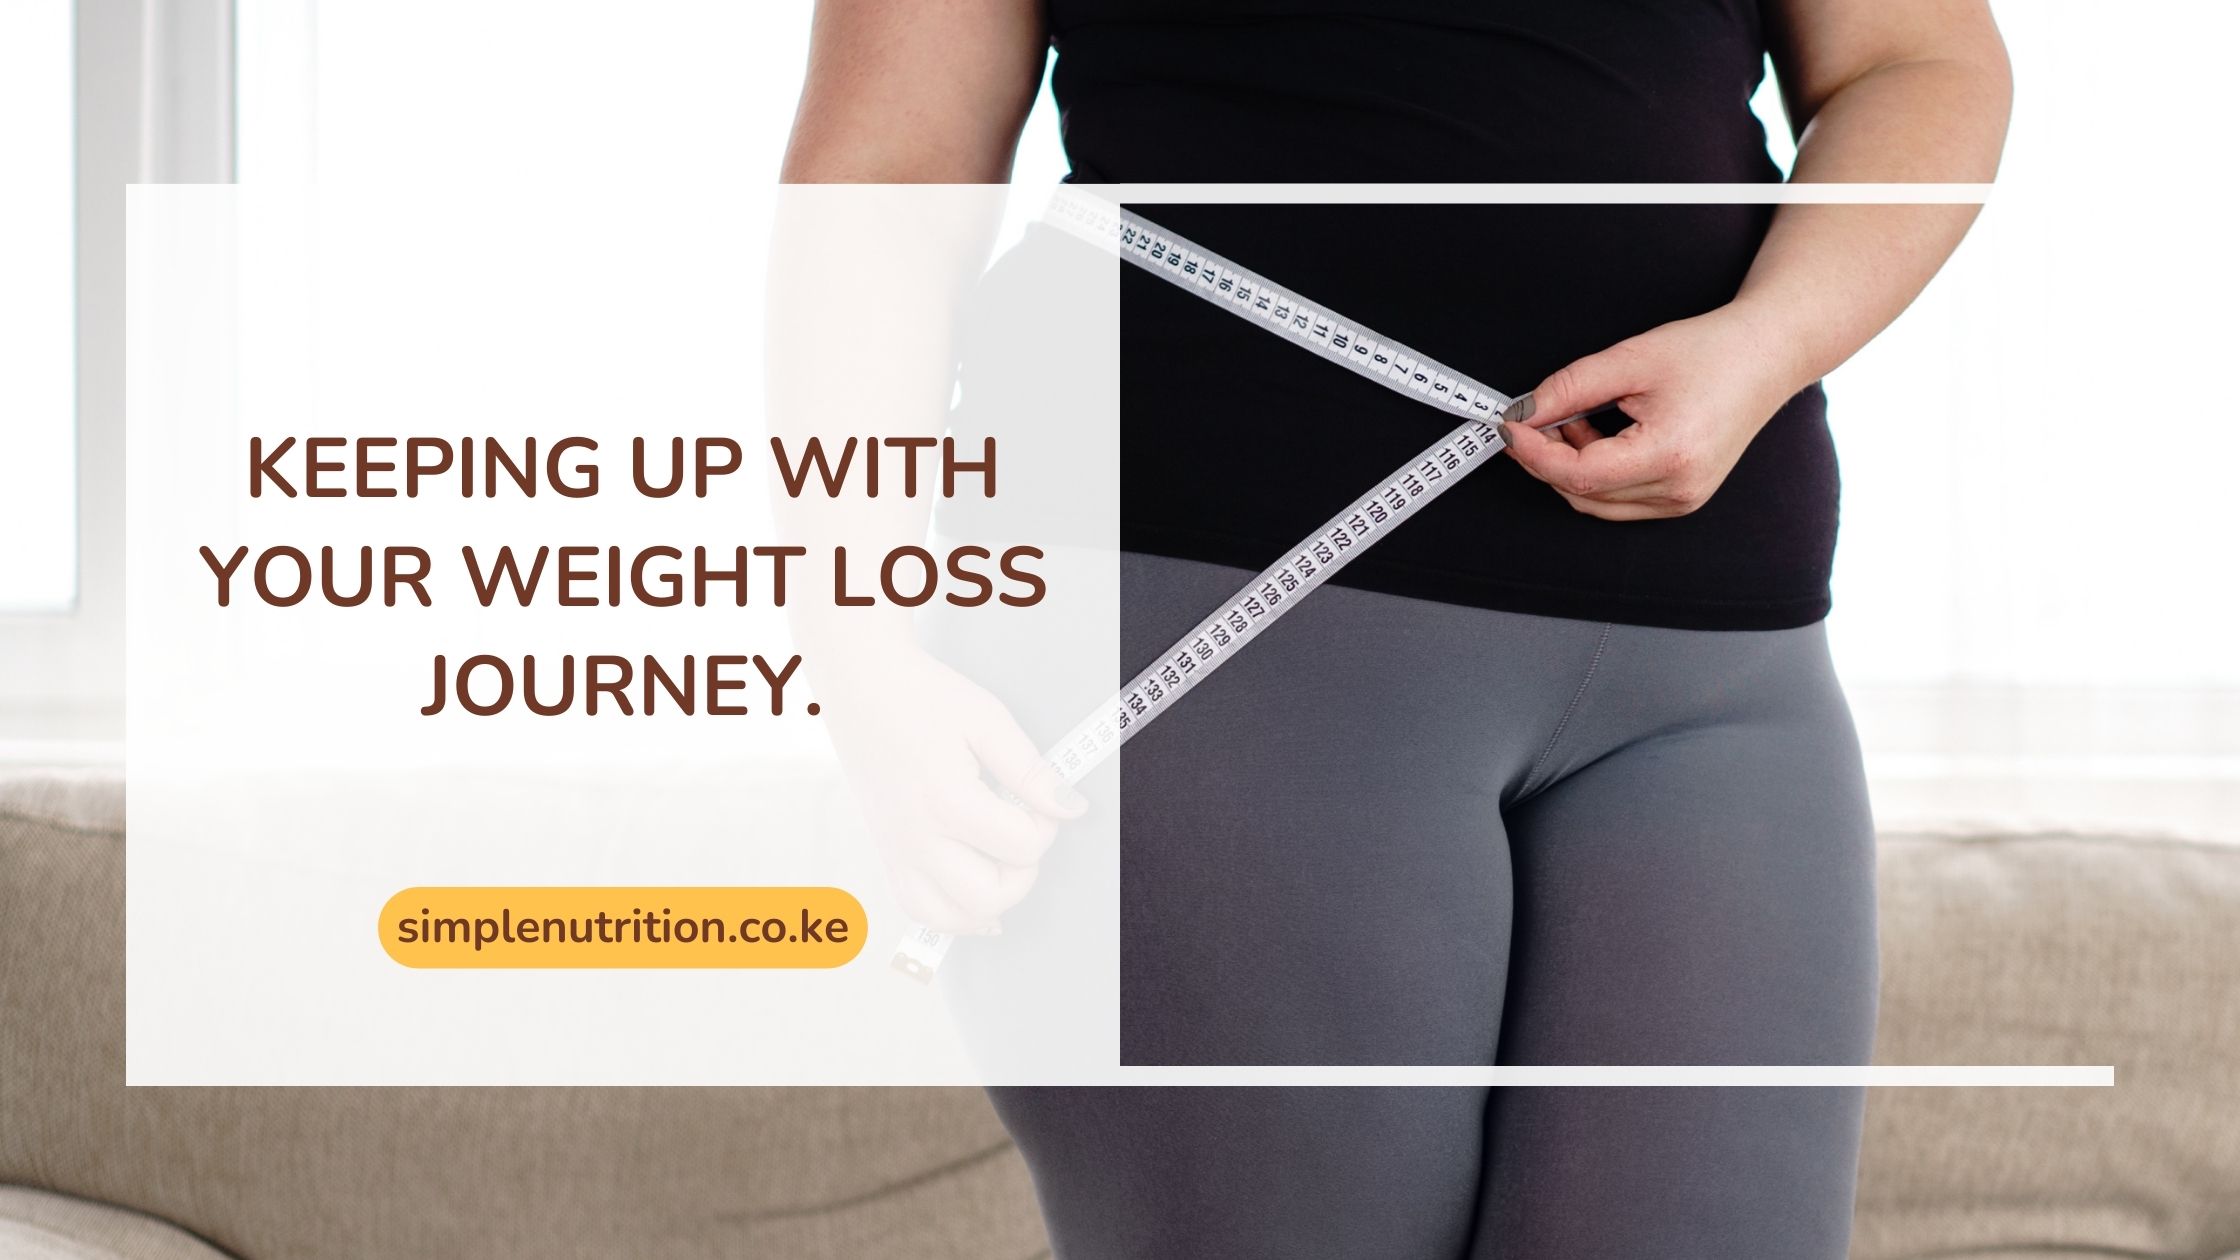 How to Cope up with Weight loss, without giving up.